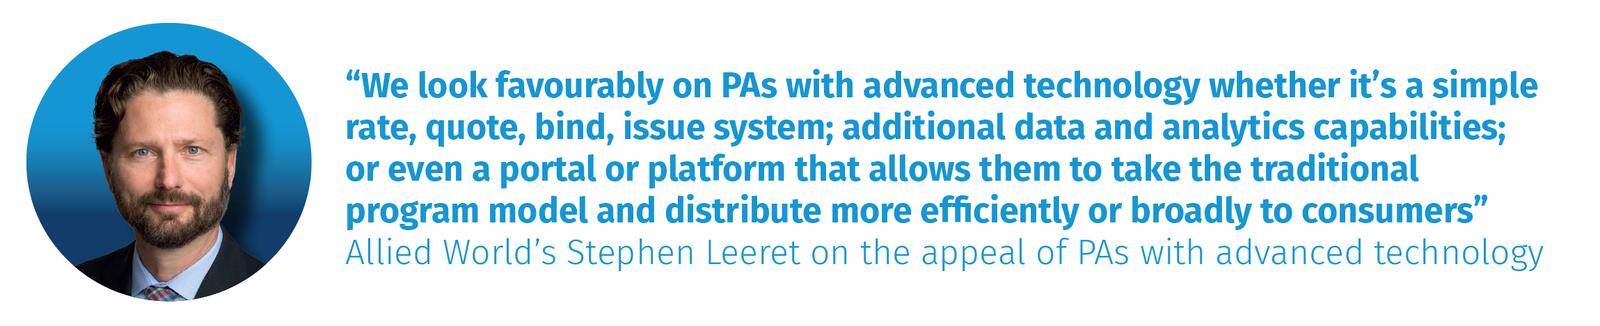 Allied World’s Stephen Leeret on the appeal of PAs with advanced technology